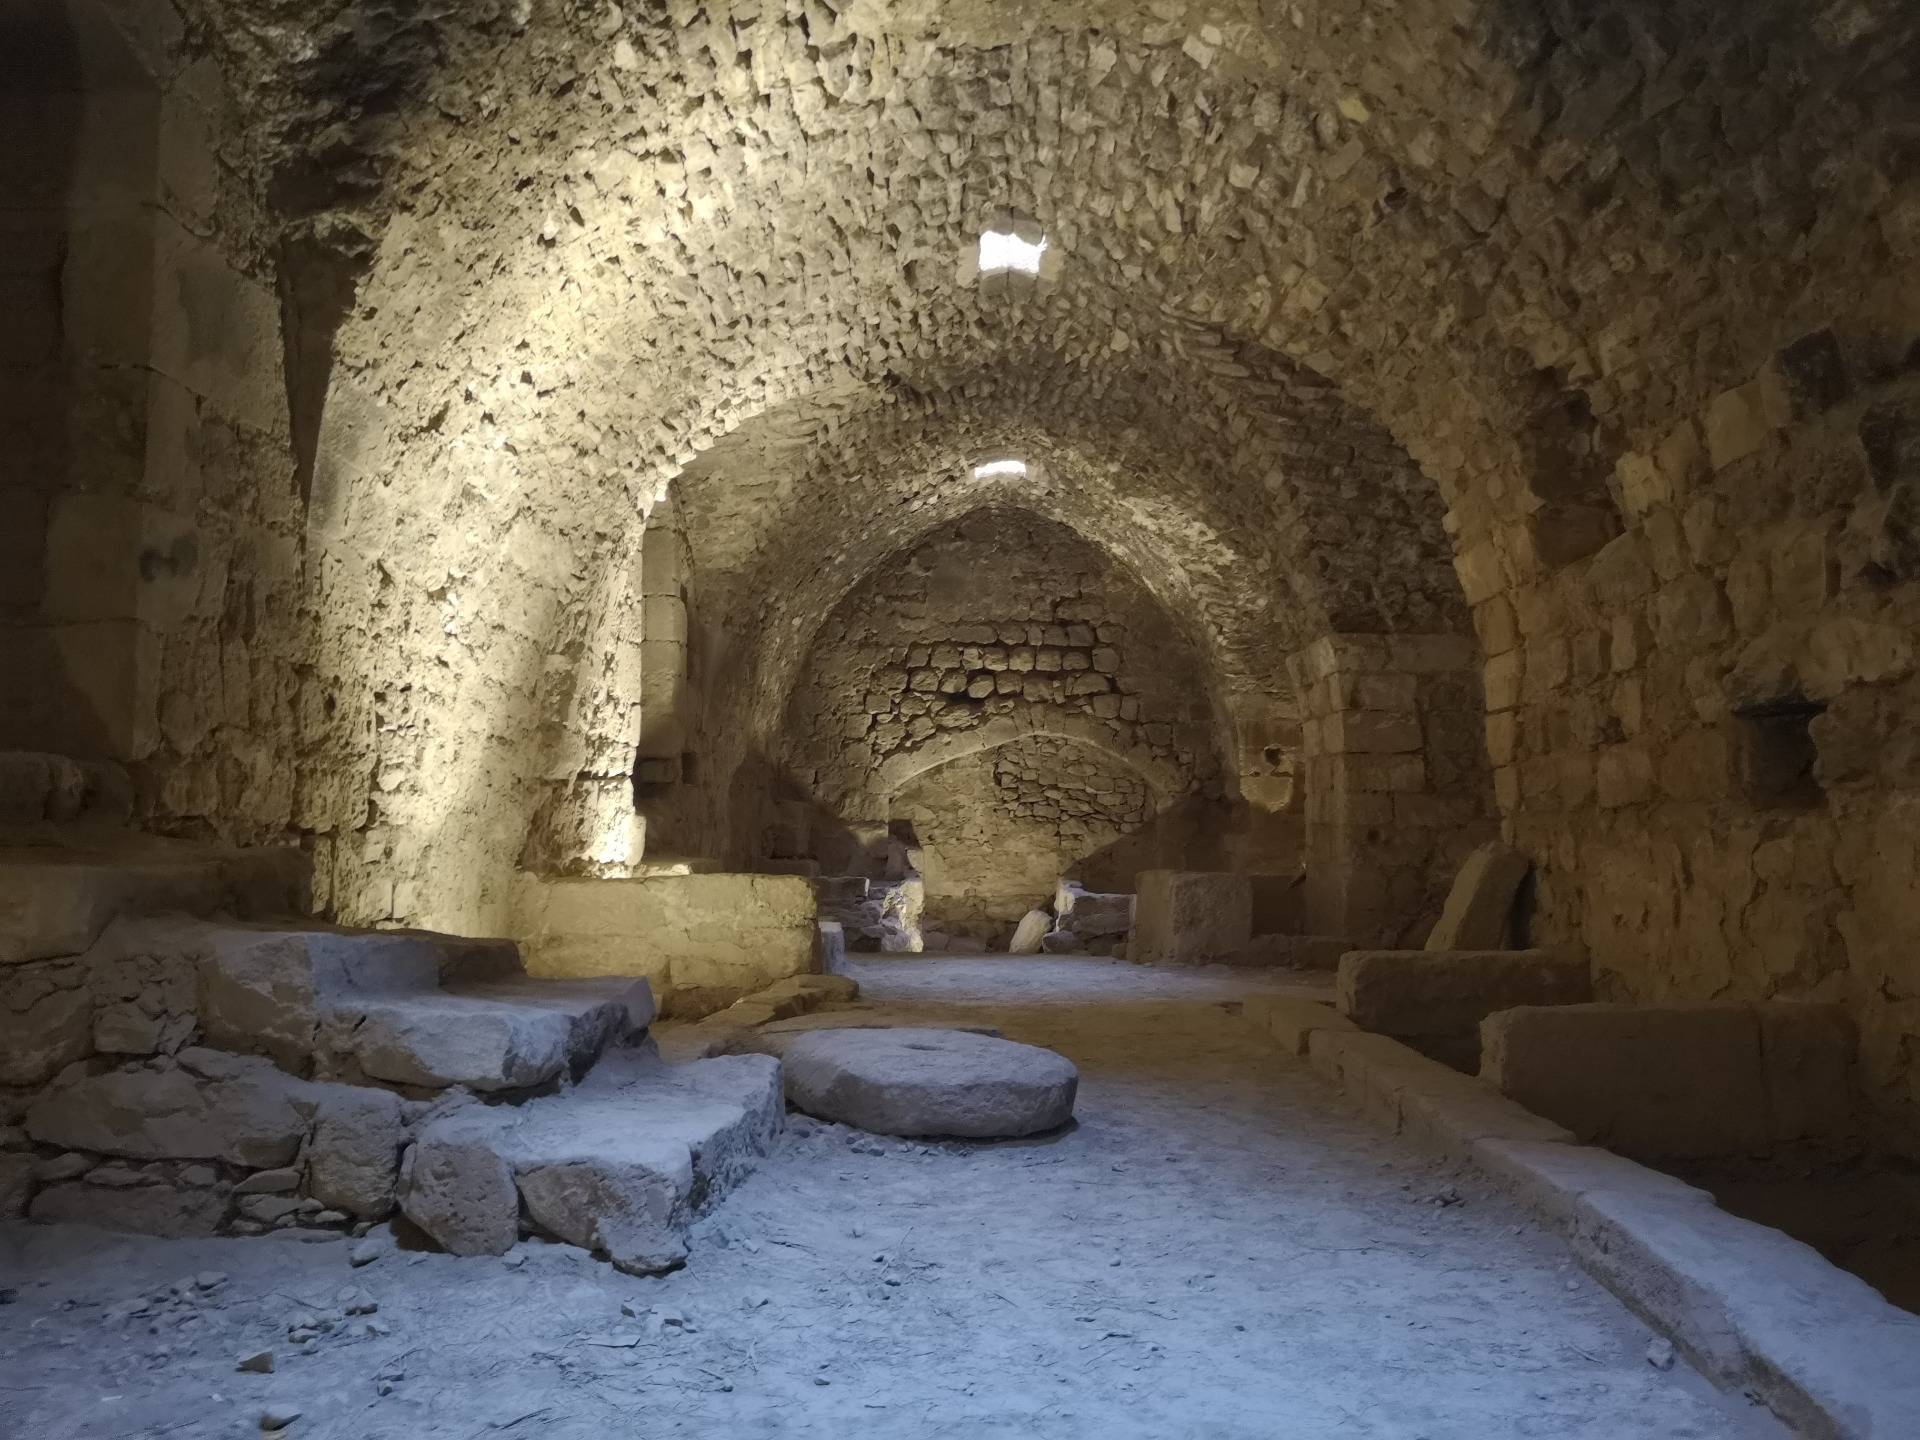   By the request of the Sultan of Damascus al-Mu’azzam ‘Isa an escape tunnel from castle to the town was built in 1227 AD. Photo by Alis Monte [CC BY-SA 4.0], via Connecting the Dots